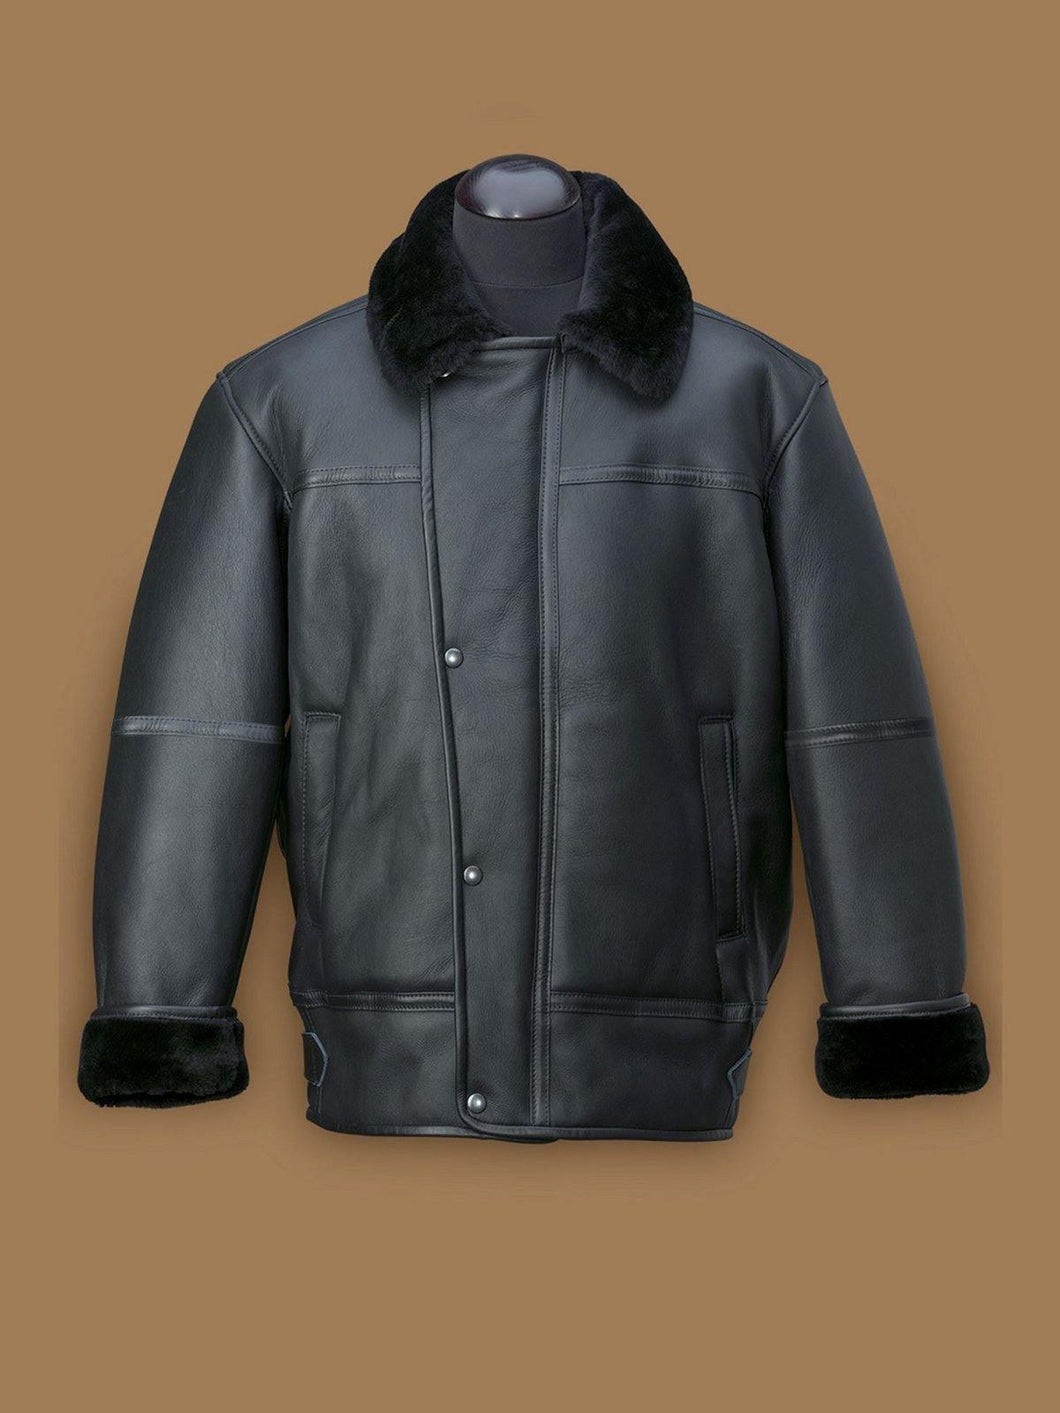 Men's Black Aircraft Shearling Bomber Leather Jacket